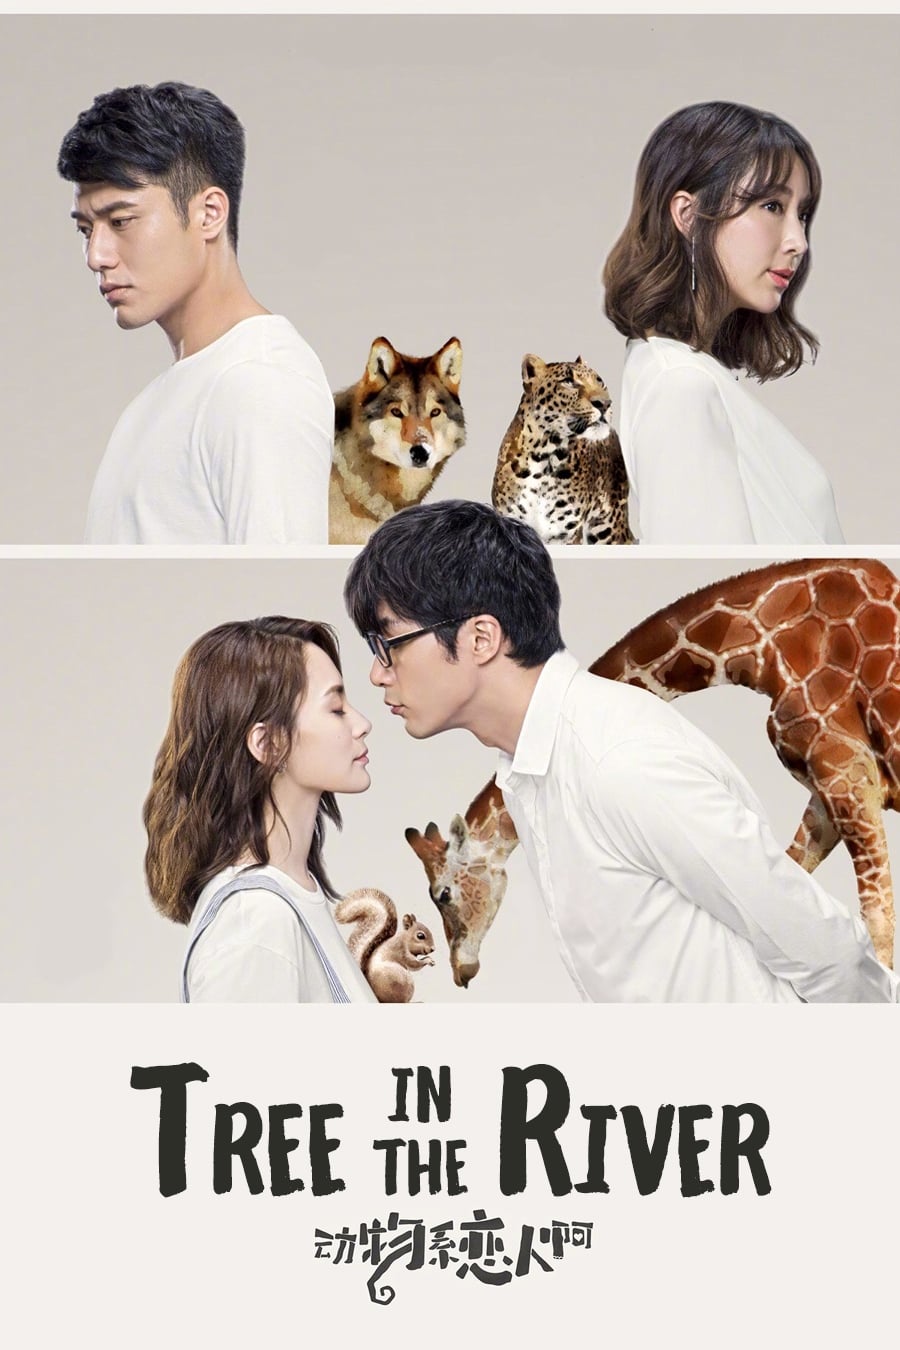 Tree in the River (2018)